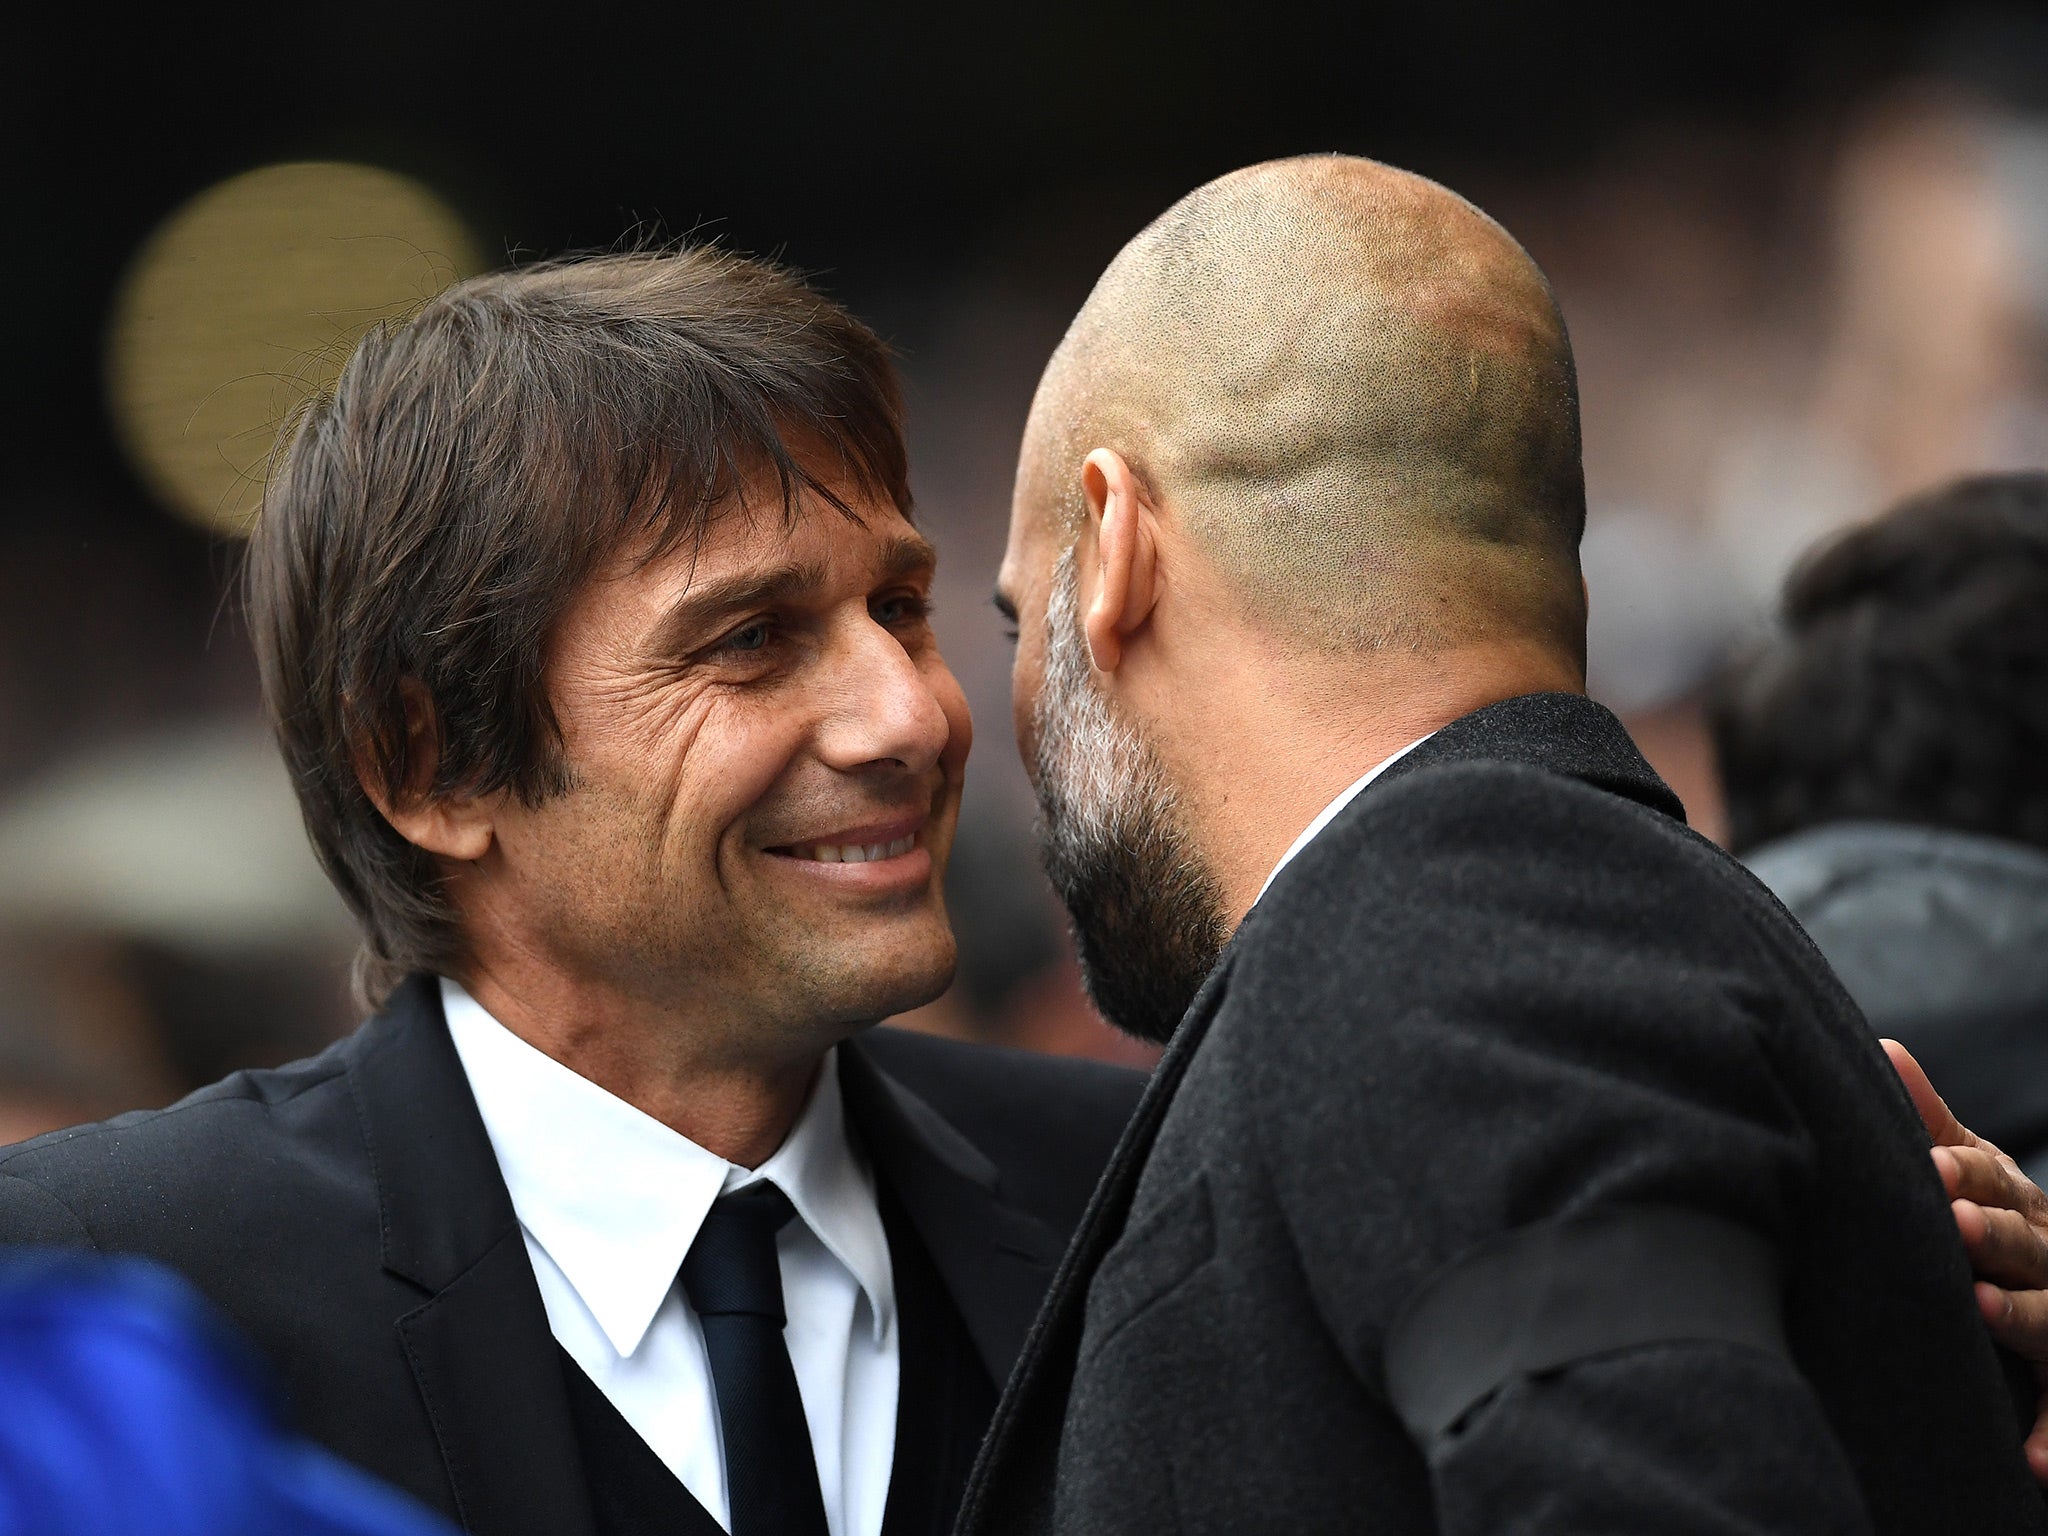 Antonio Conte and Pep Guardiola are both afflicted by an irritable perfectionism